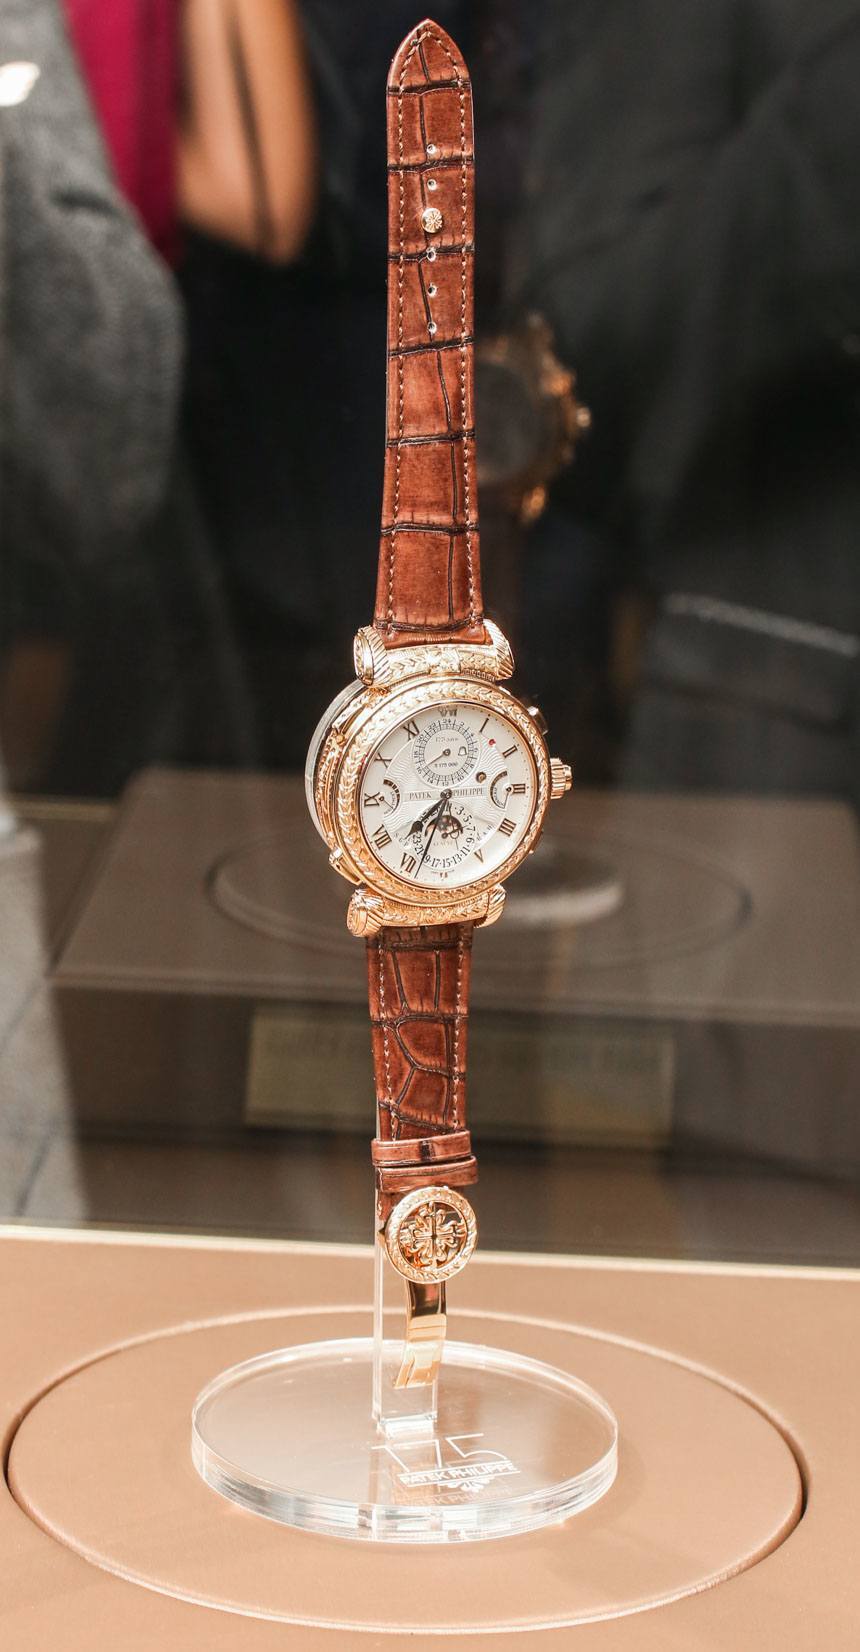 Thoughts On Seeing The .6 Million Patek Philippe Grandmaster Chime 5175 Watch In The Flesh Hands-On 